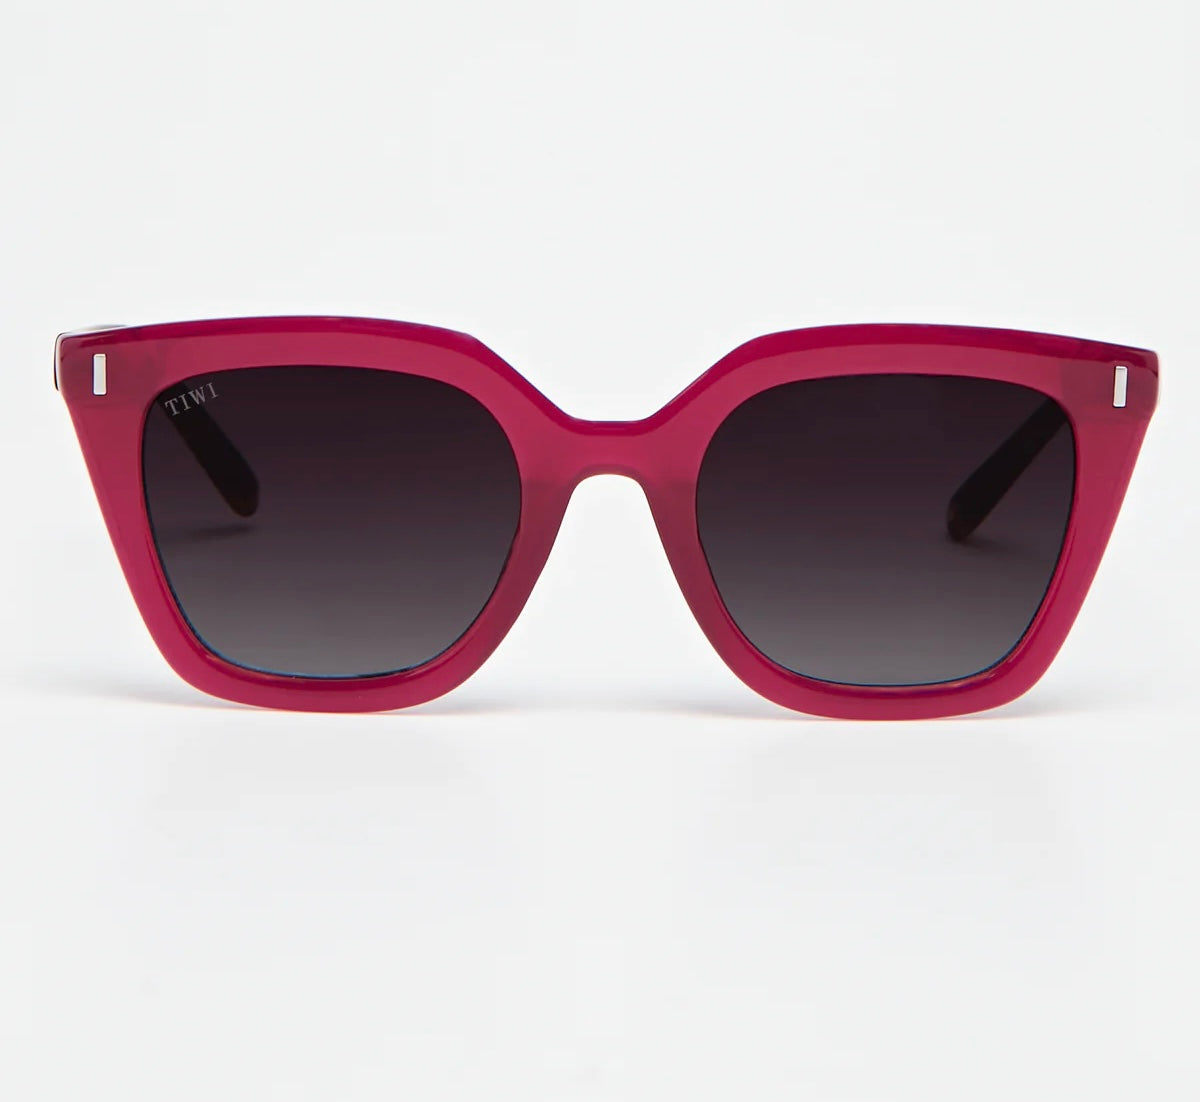 HALE Sunglasses Available in more colors Cherry Tortoise Temples  